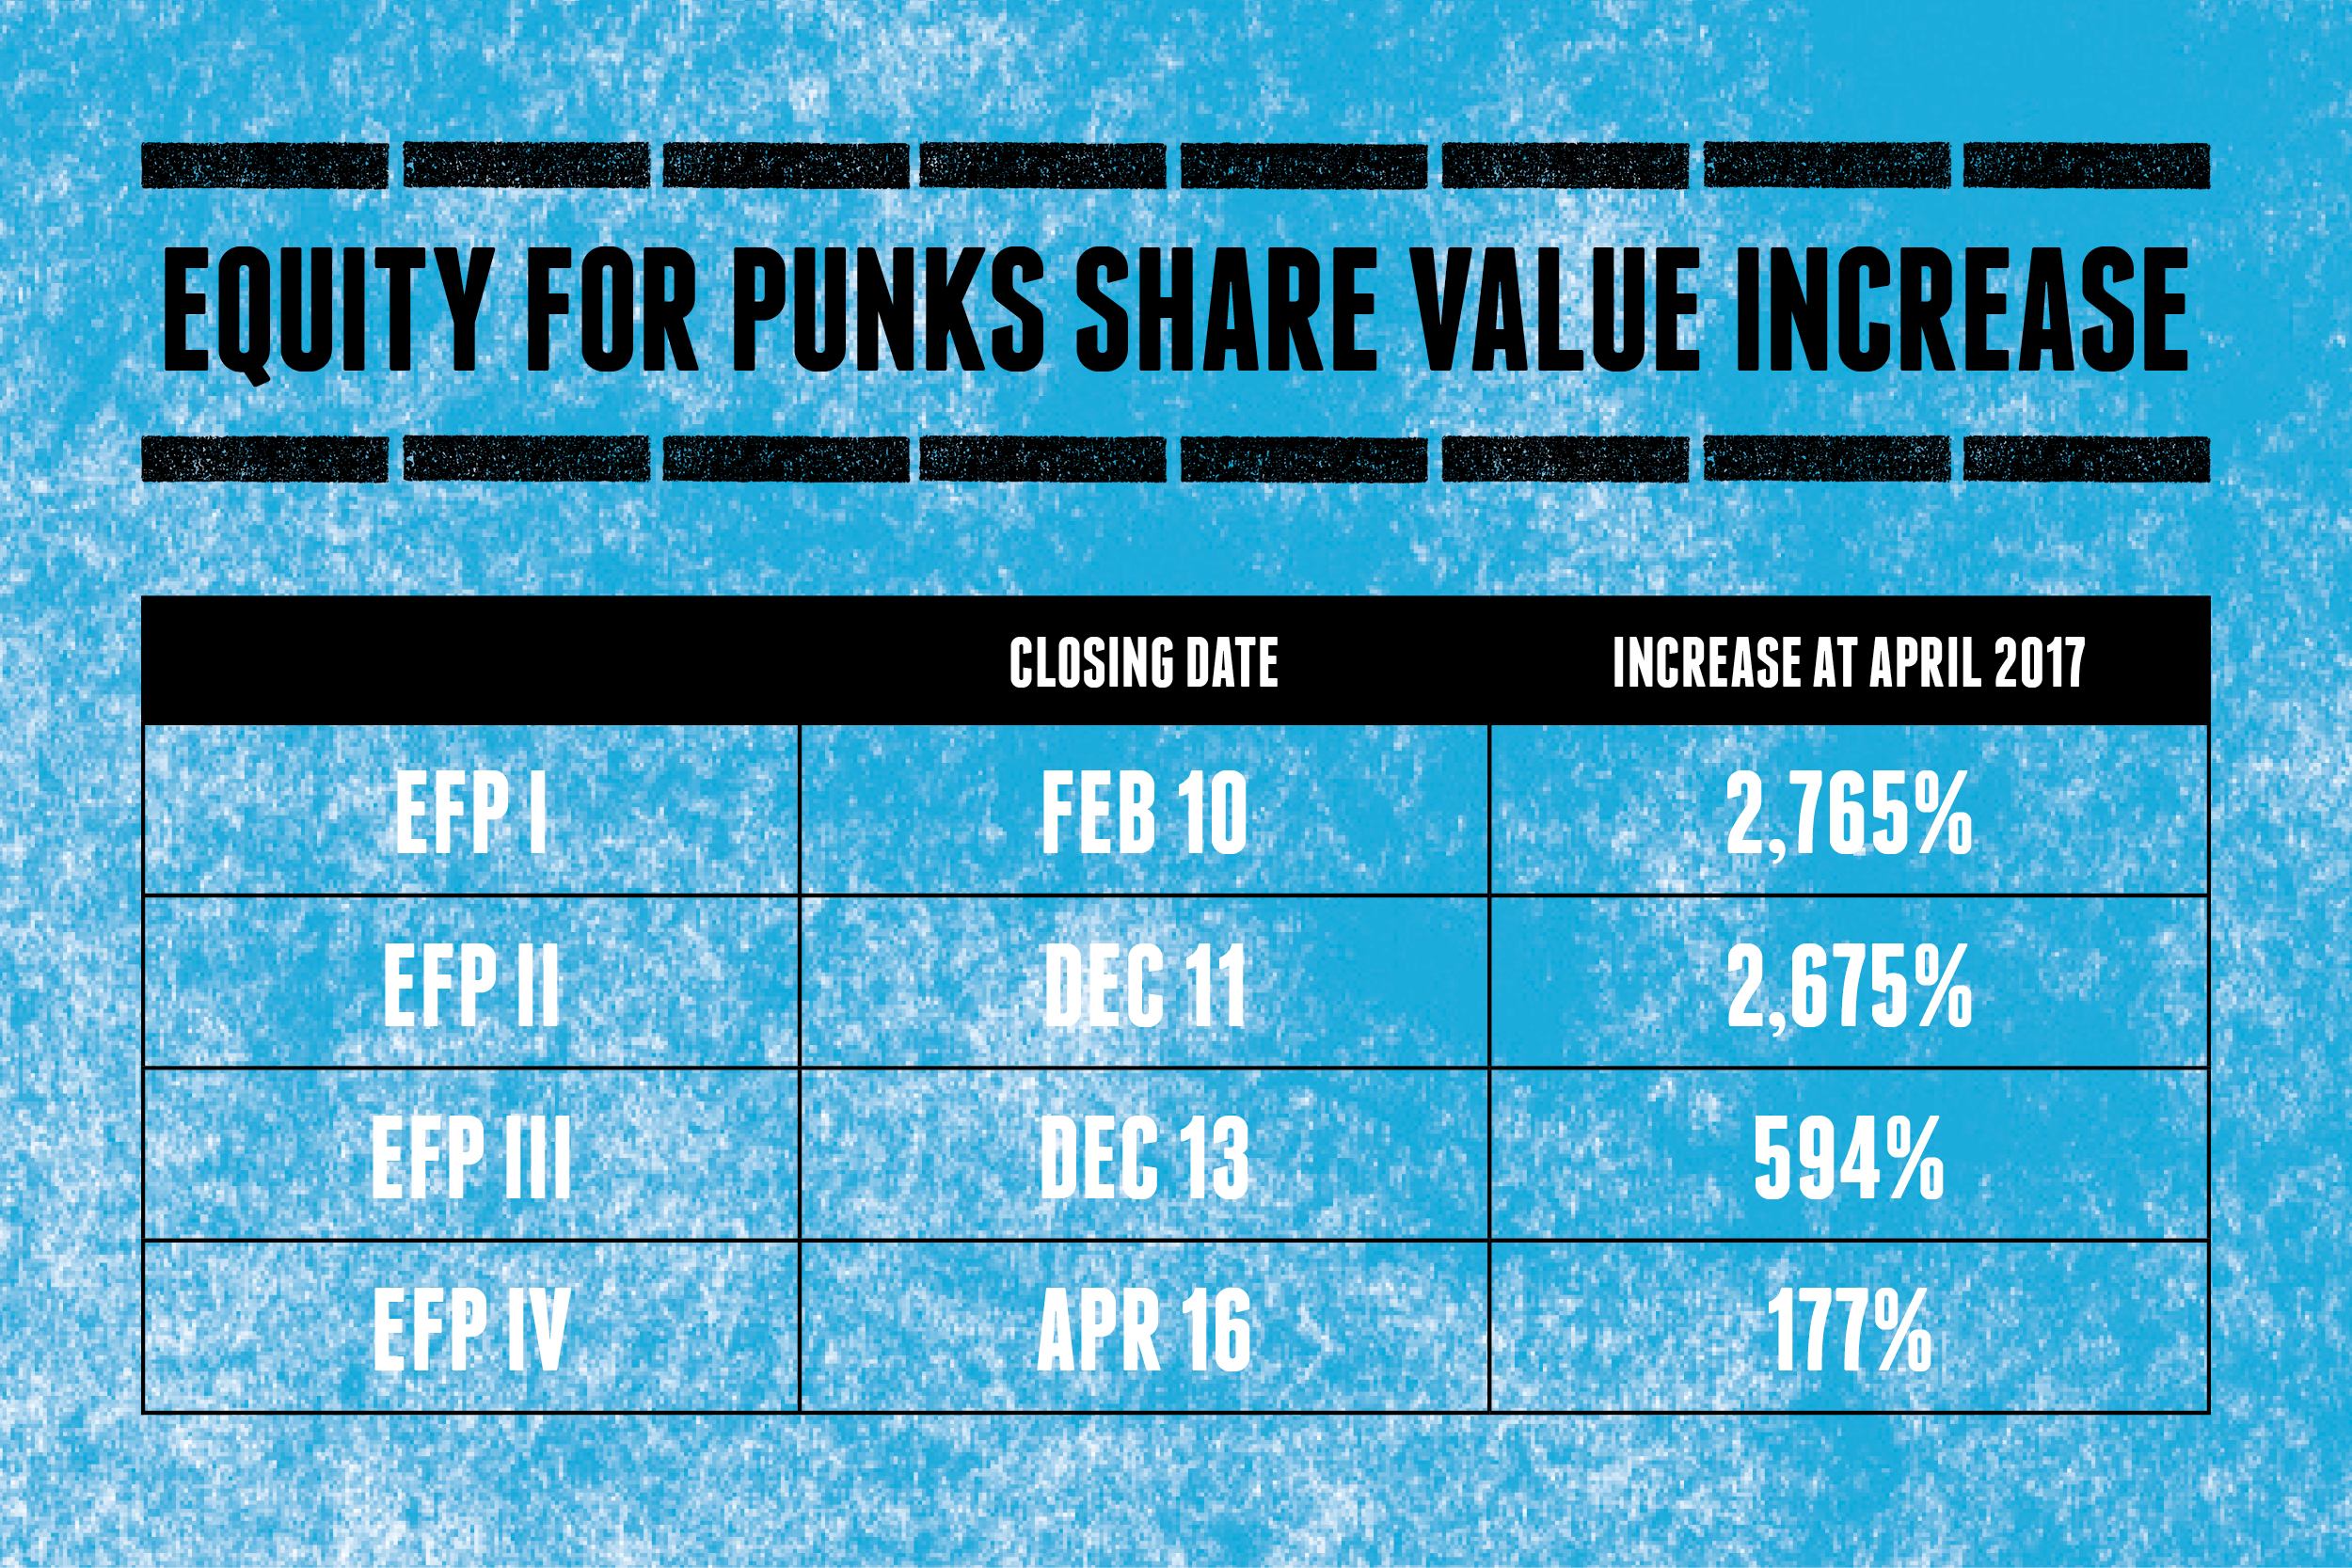 Equity Punk share value